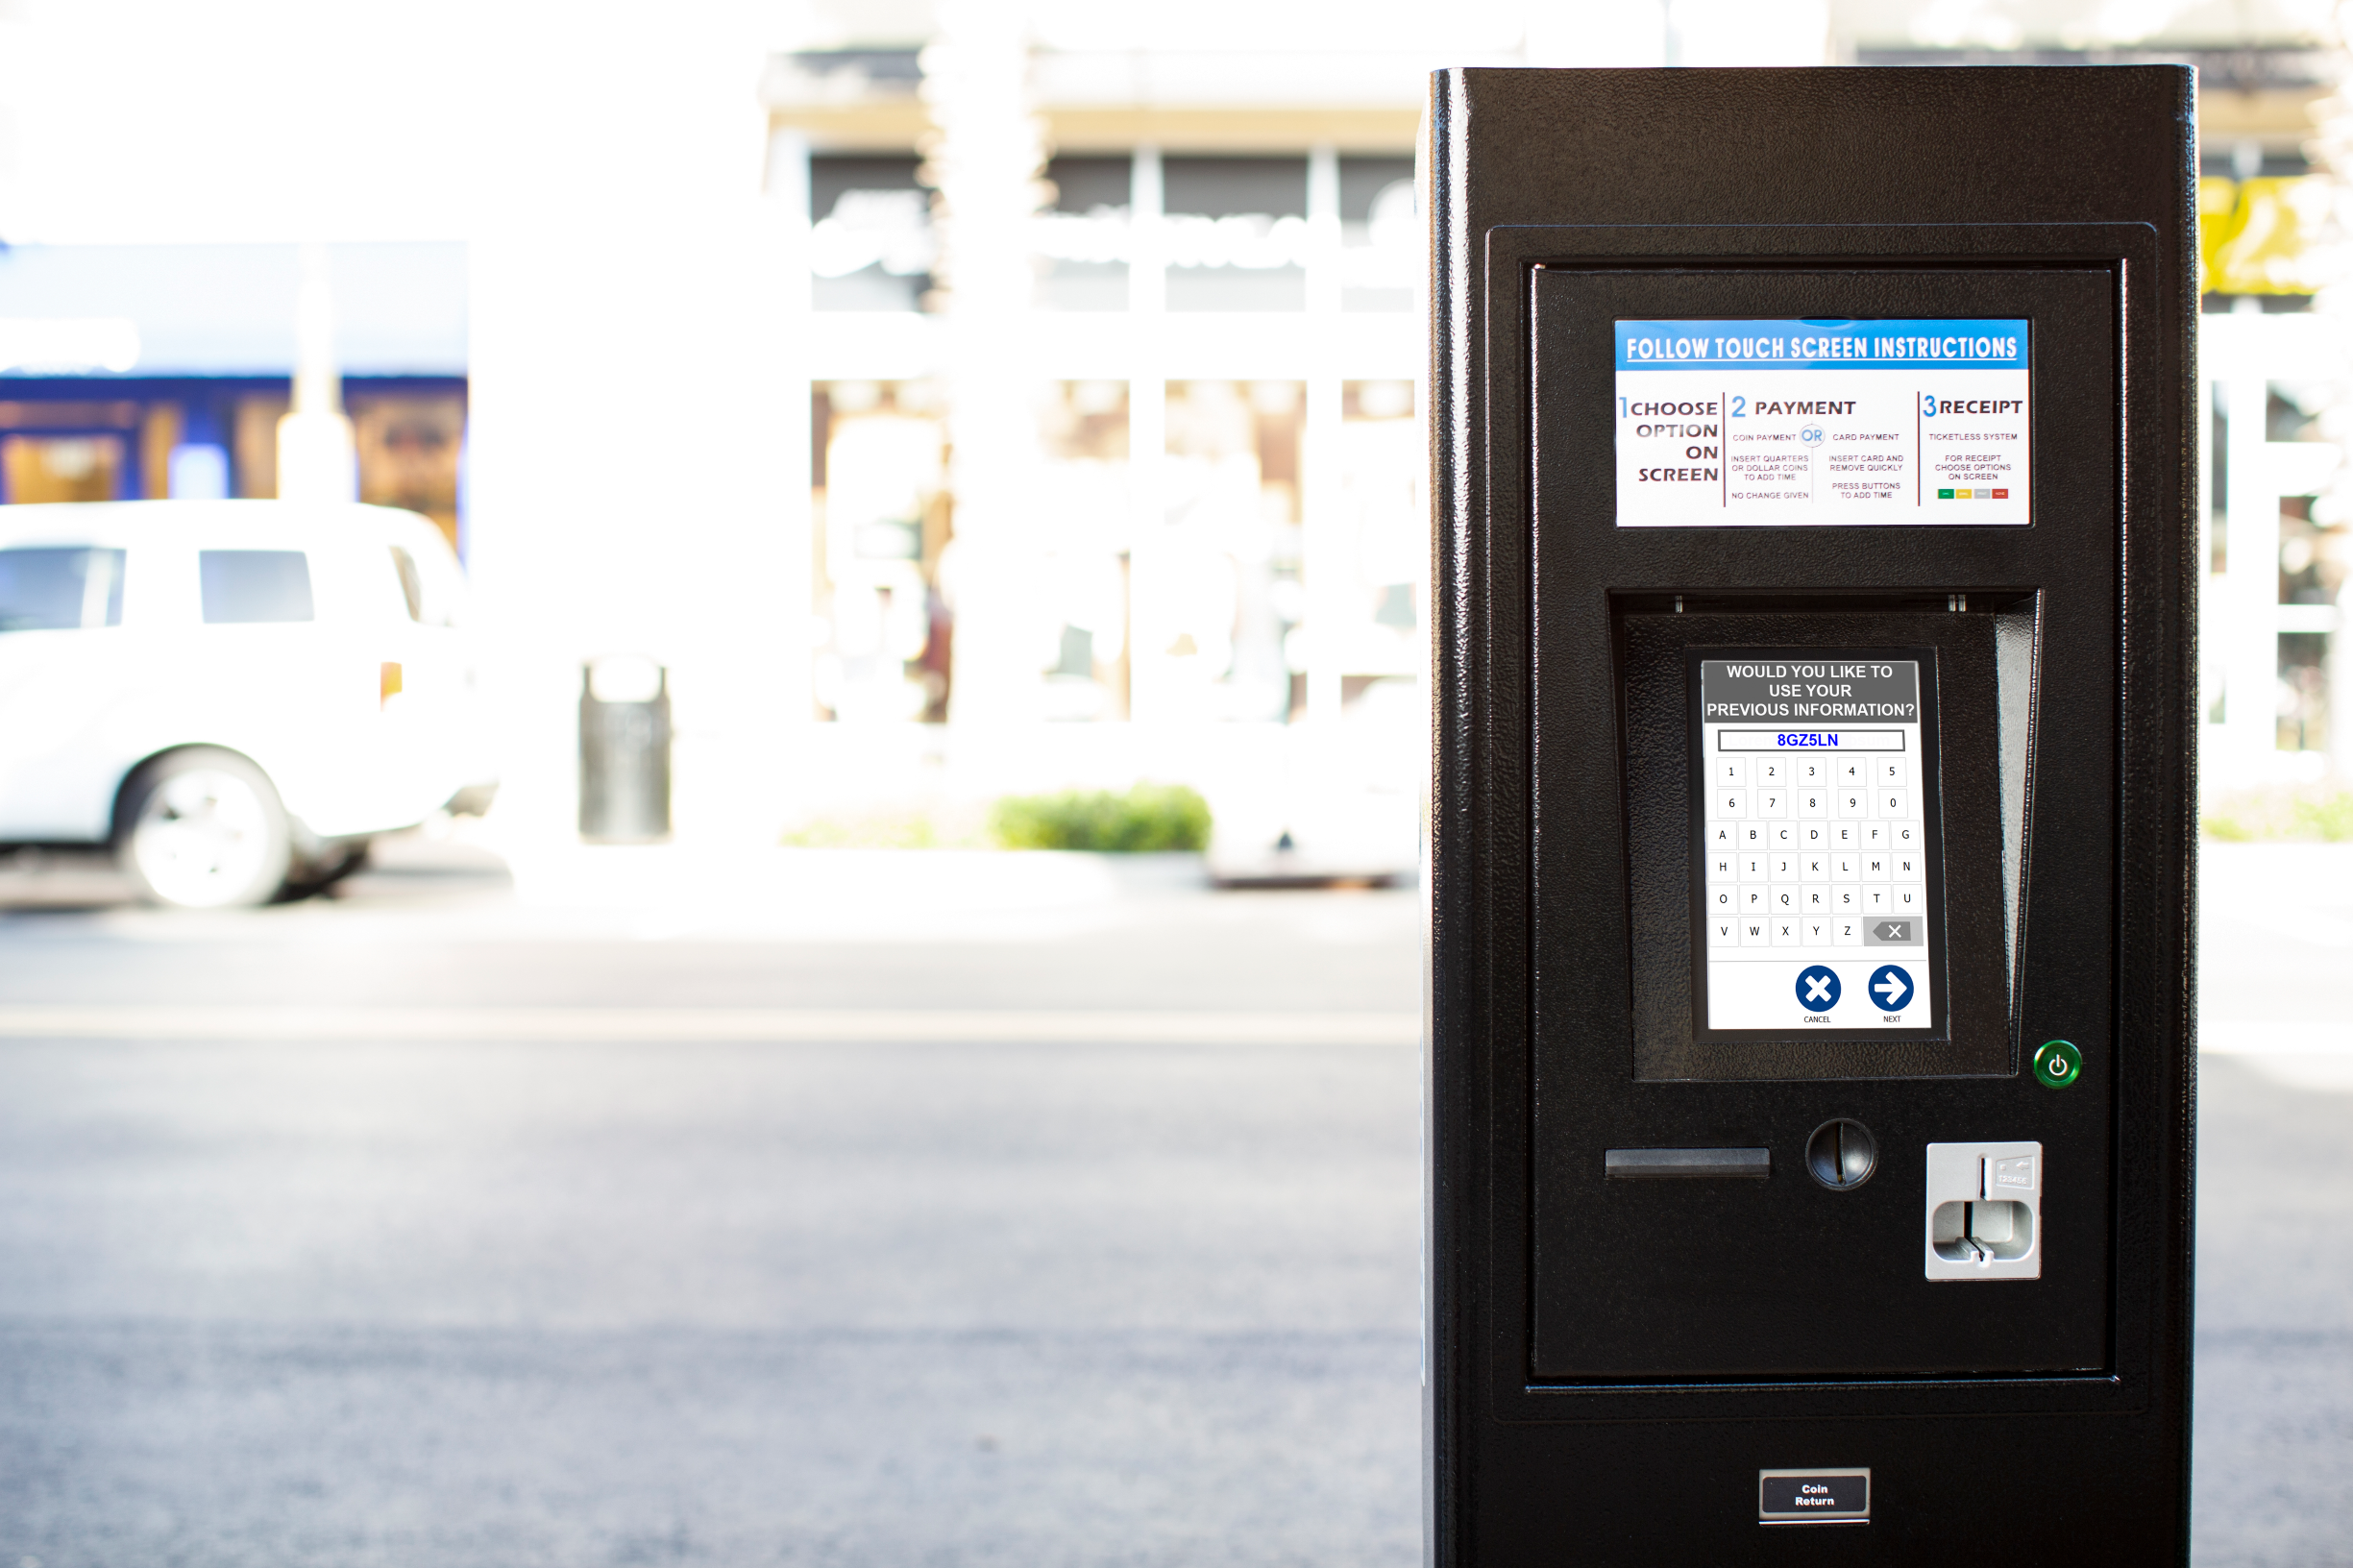 Recall feature of Flowbird's pay station software remembers license plate number to limit interactions with meters.